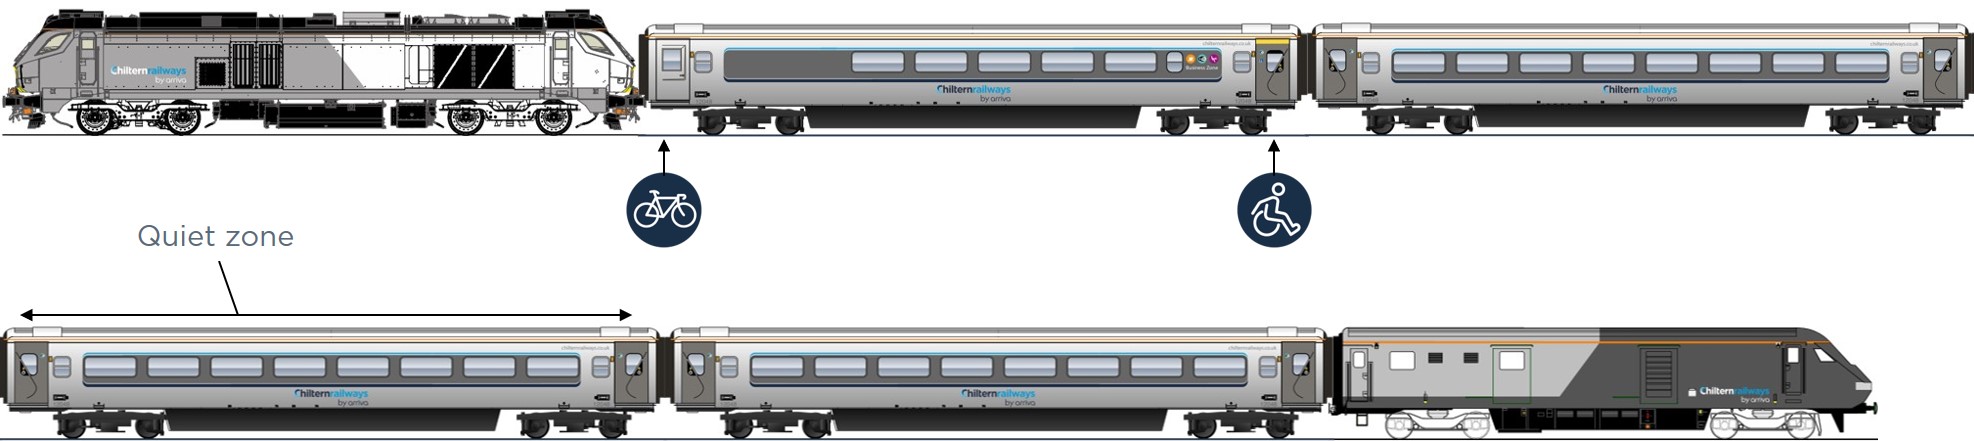 diagram showing a 4 car formation of our class 68 locomotive hauled trains split in to two. The disabled access point is on the rear door on the first carriage and bike entrance at the front of the first carriage